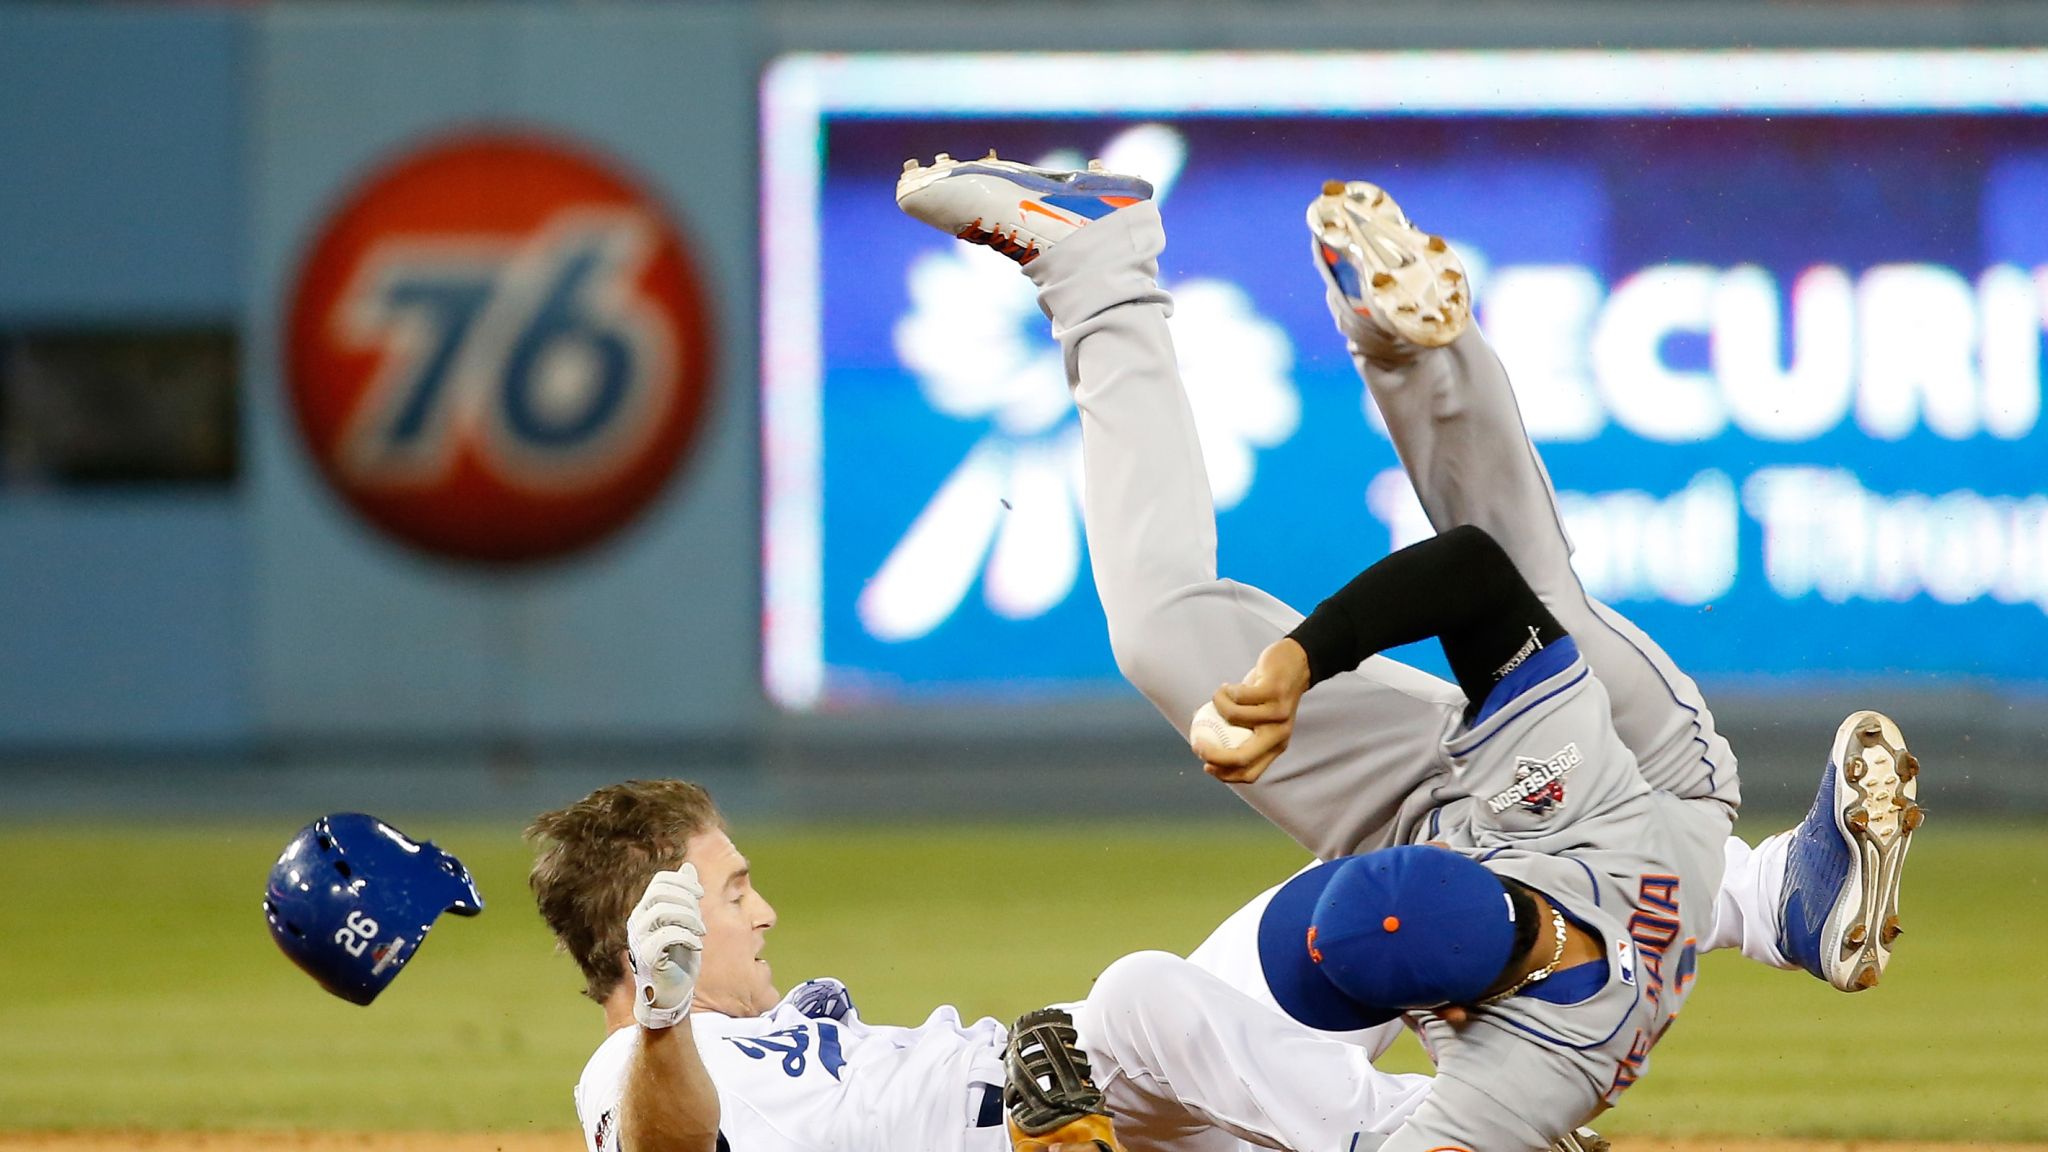 New York Mets' David Wright, center, slides into third base after